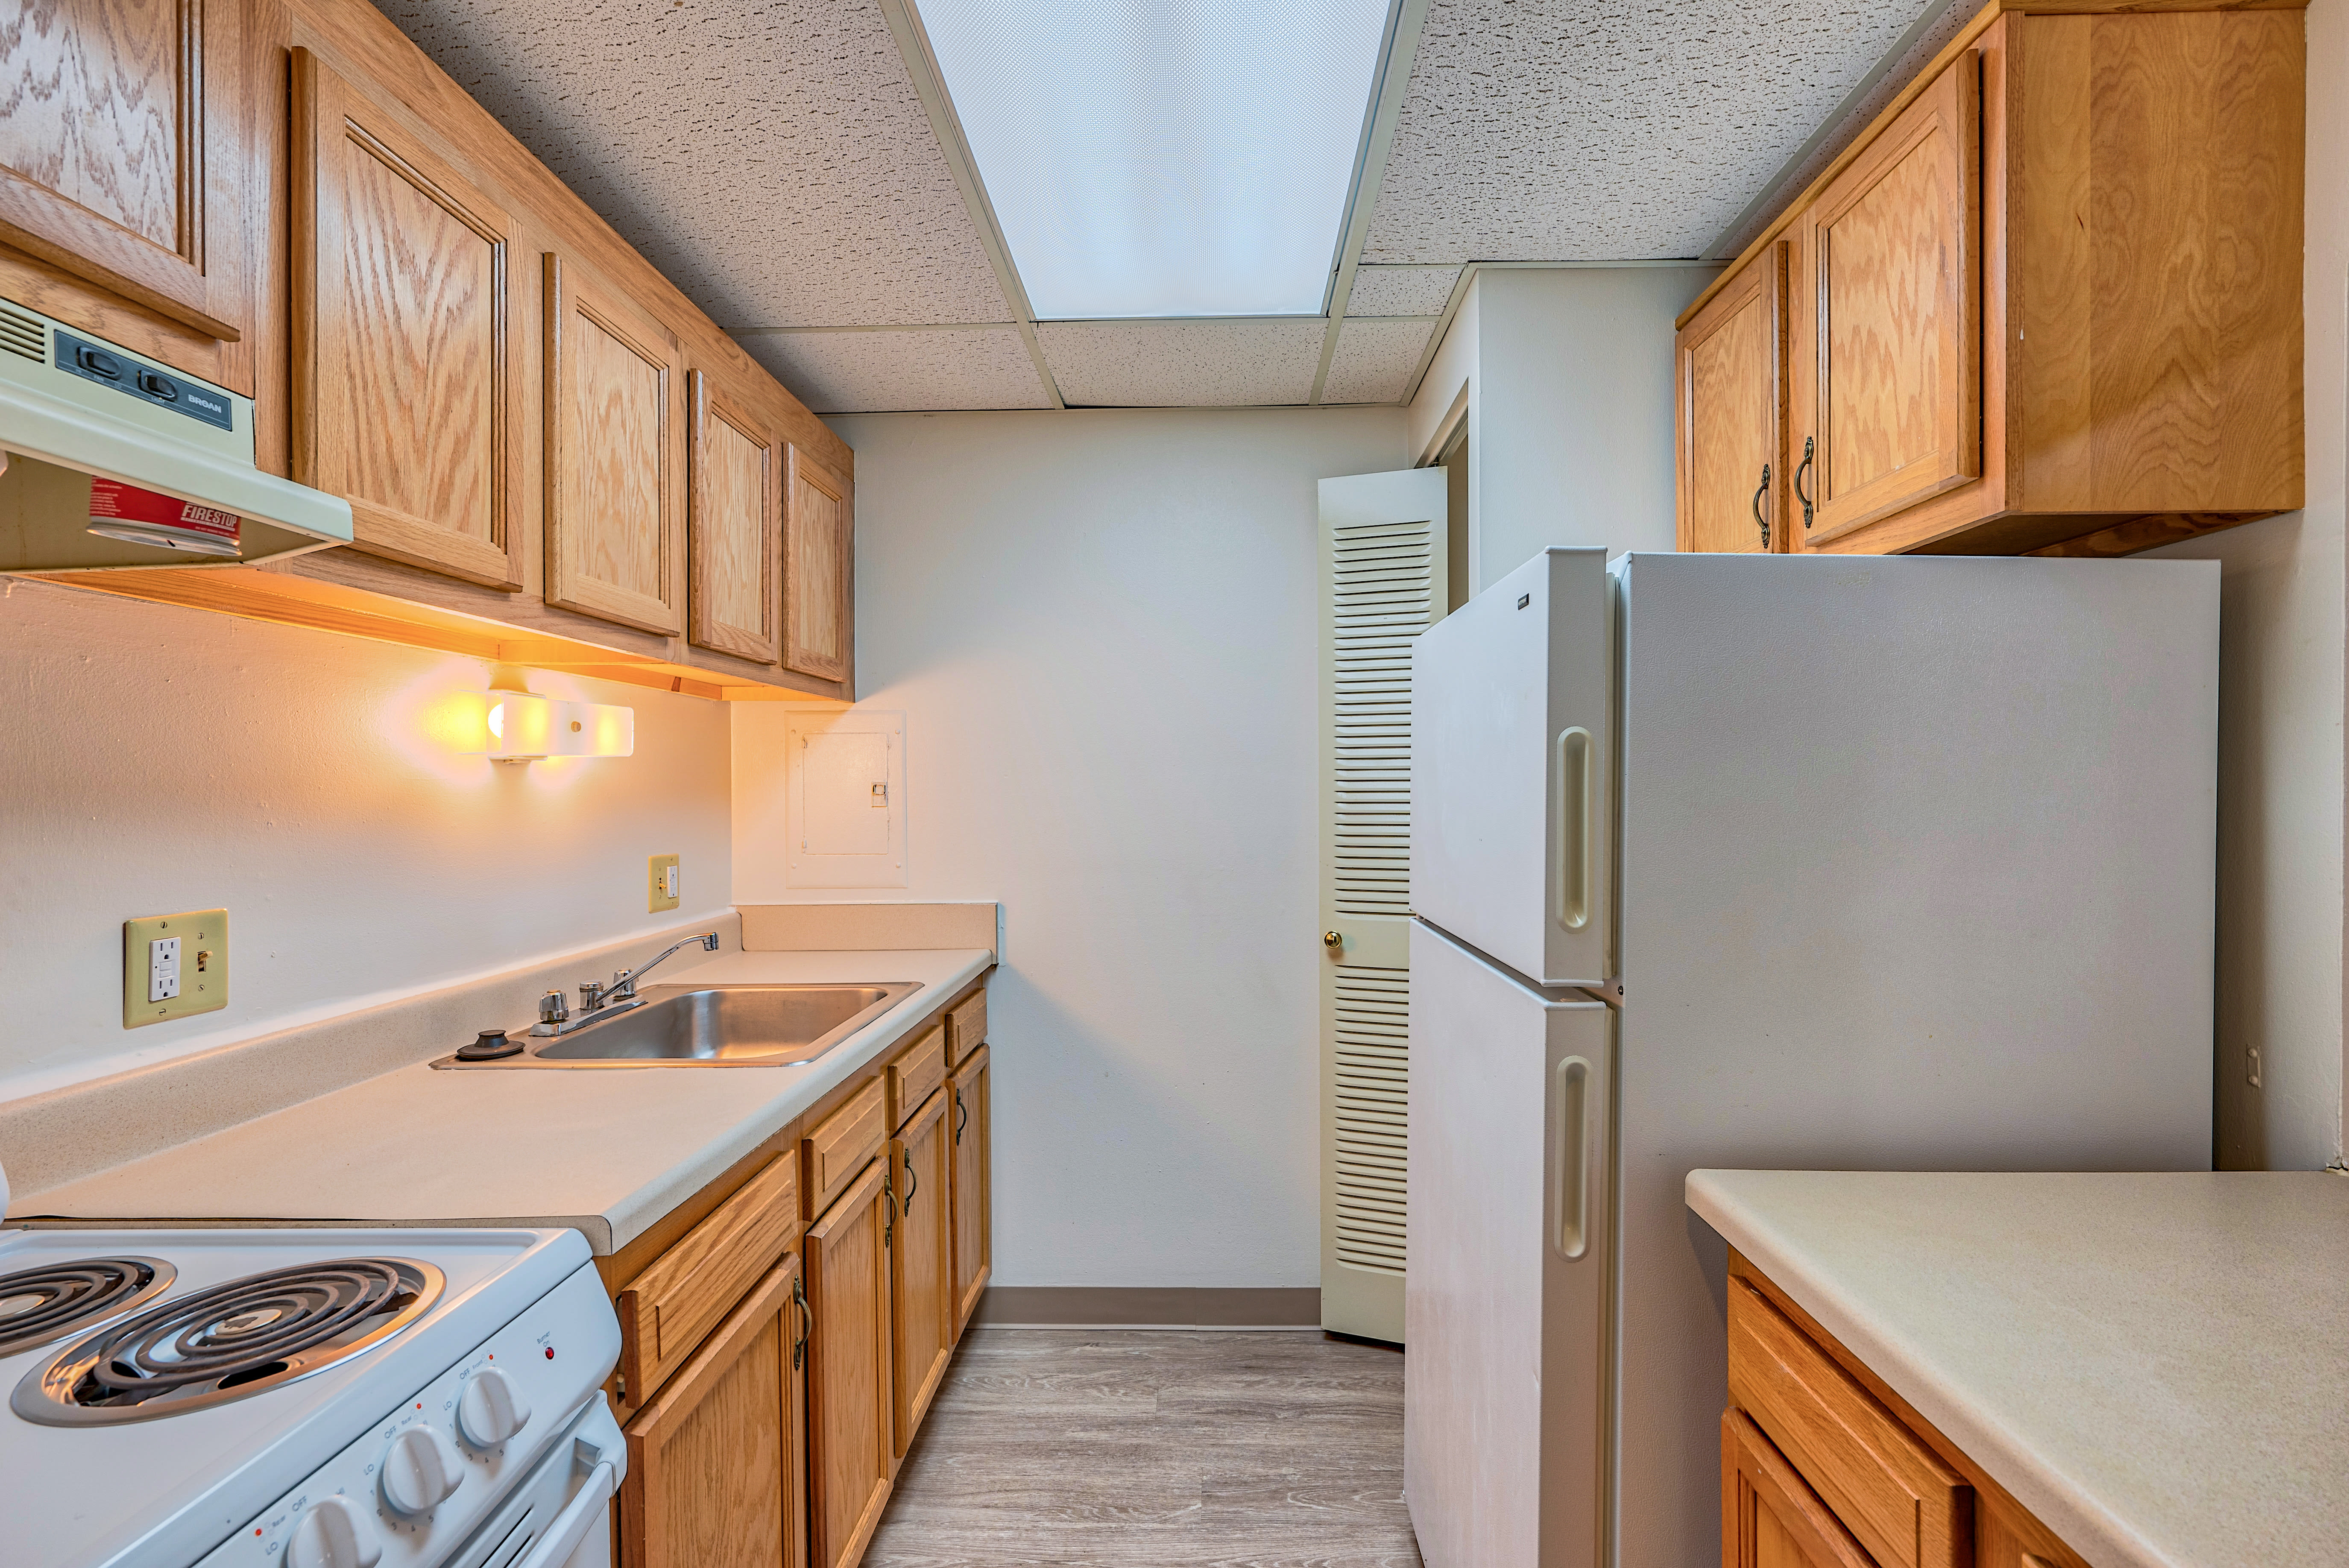 Fully equipped kitchen at Towne Centre Place in Ypsilanti, Michigan